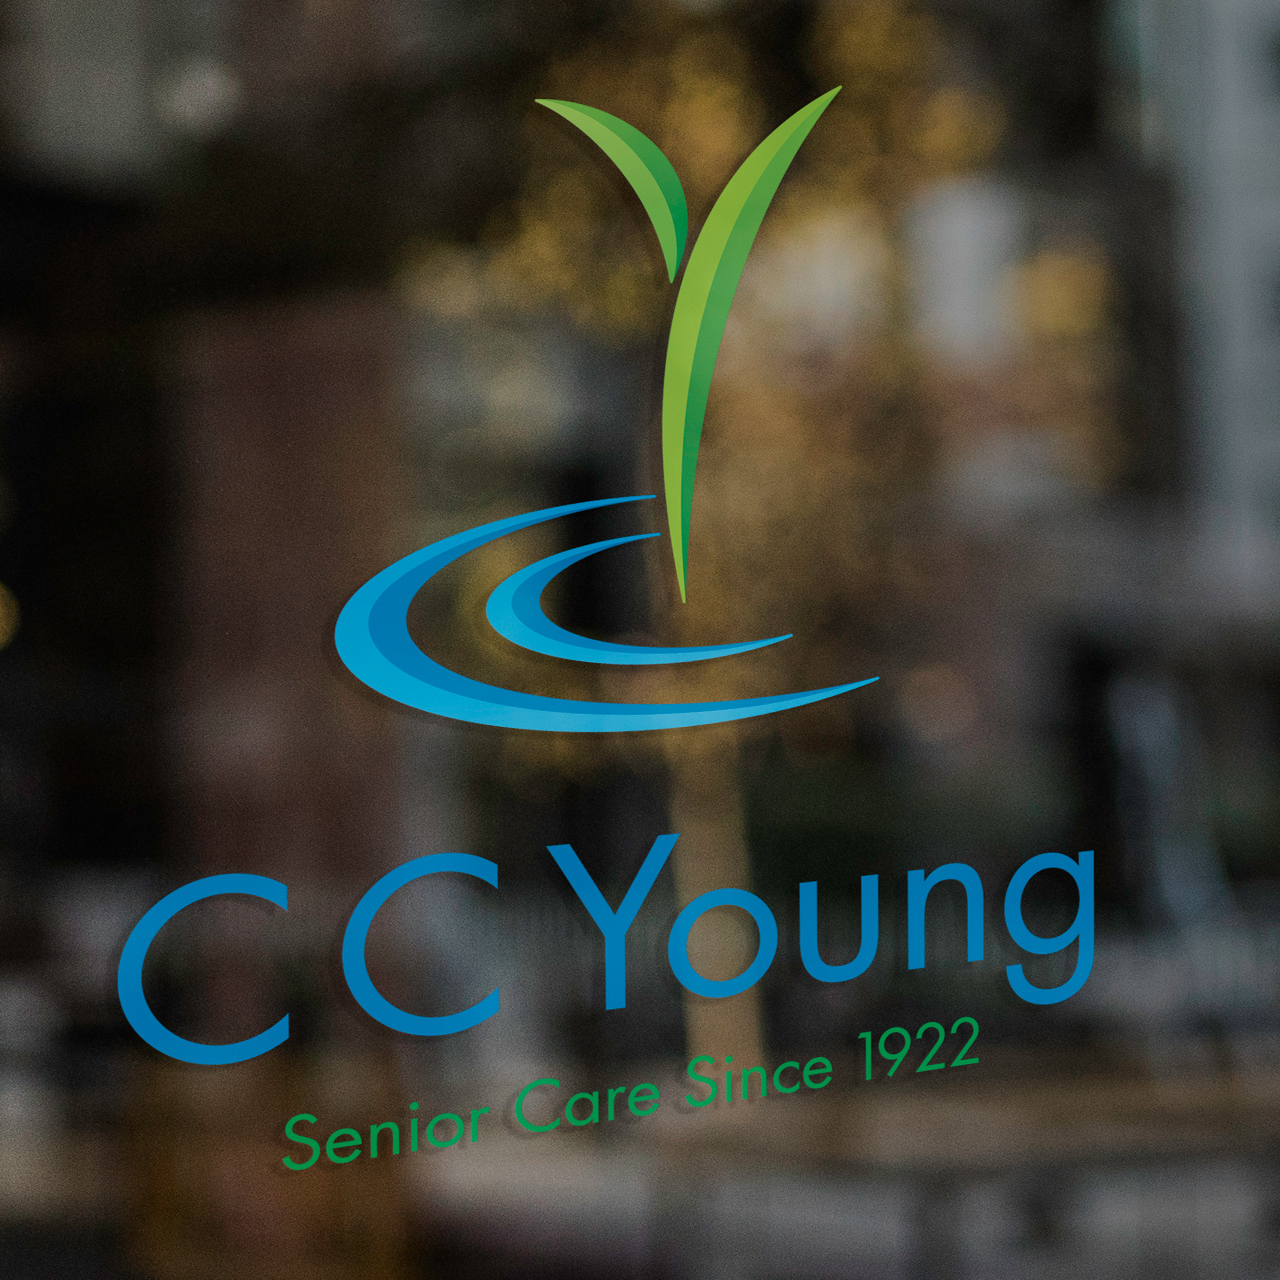 An image of a glass door with the C. C. Young logo design on it